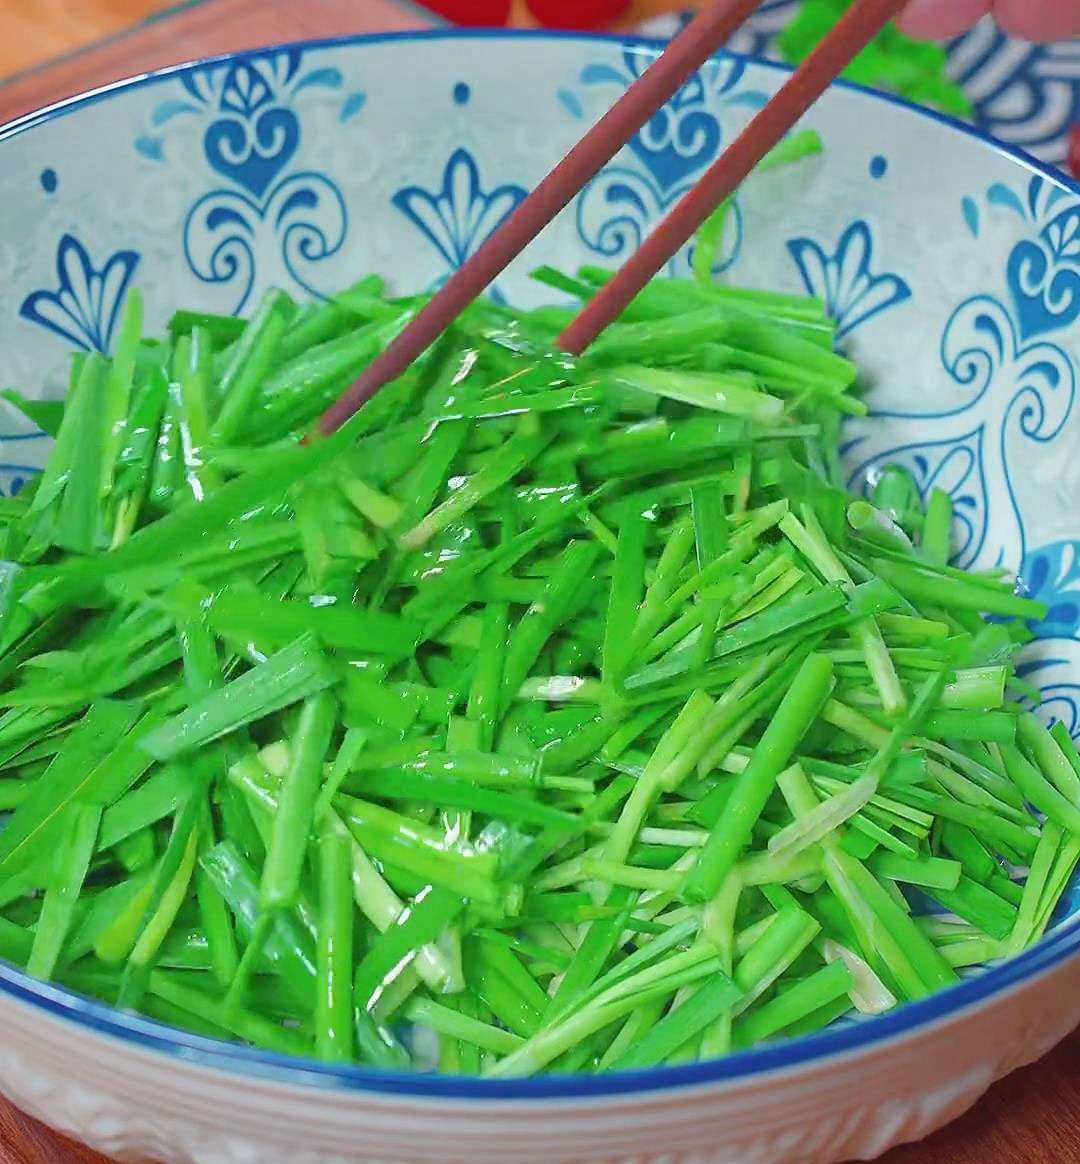 mix the chopped chives with a spoonful of oil